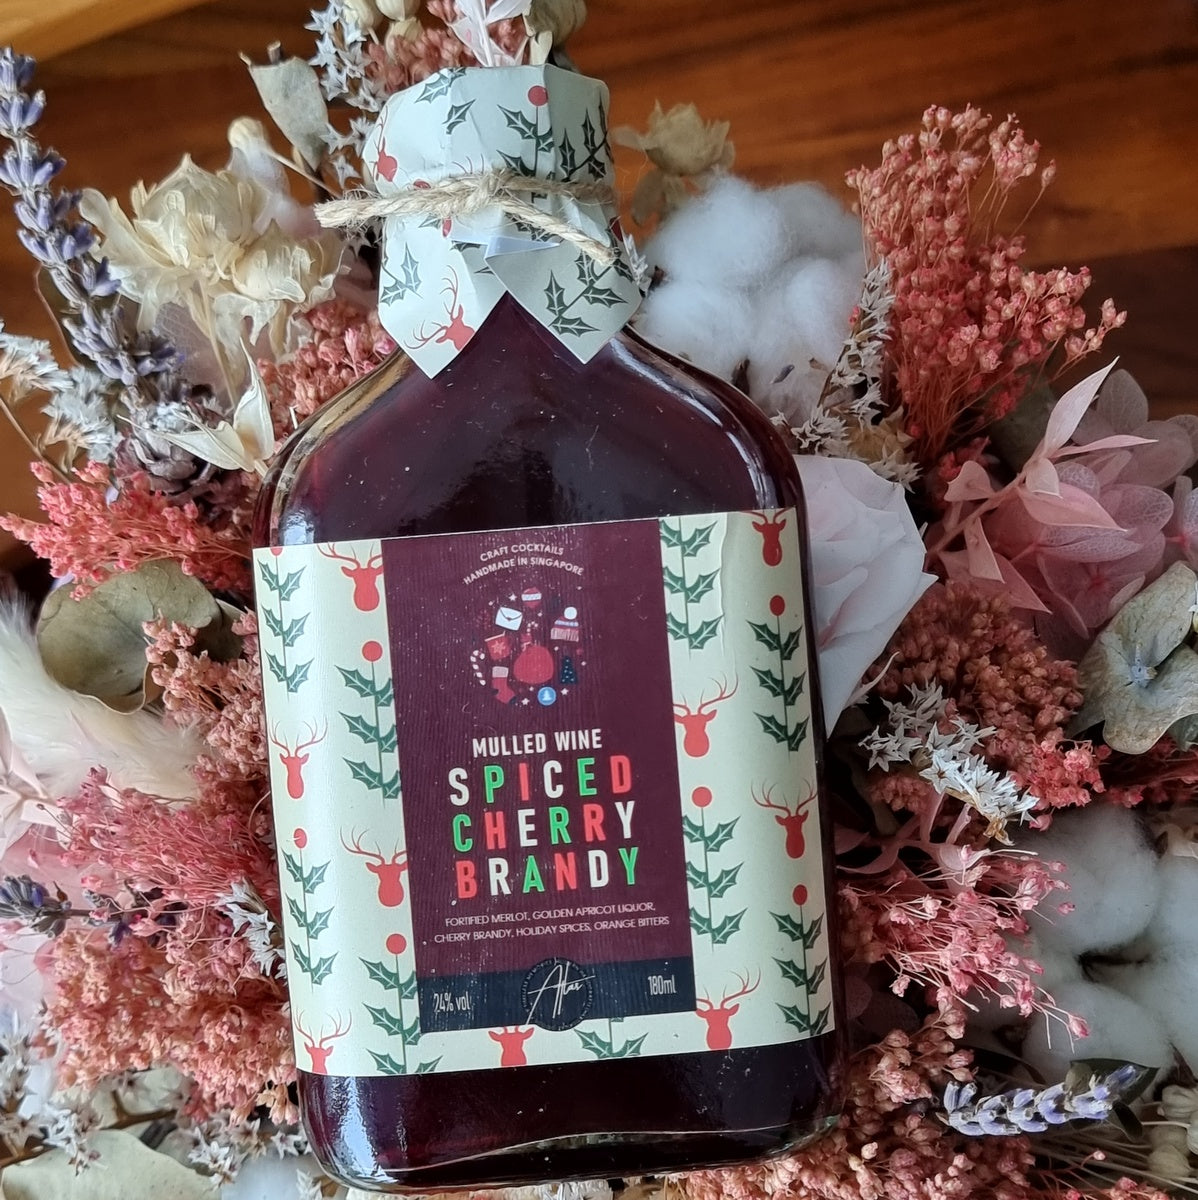 Wine Brandy – Cherry Mulled Handcrafted Spiced Atlas